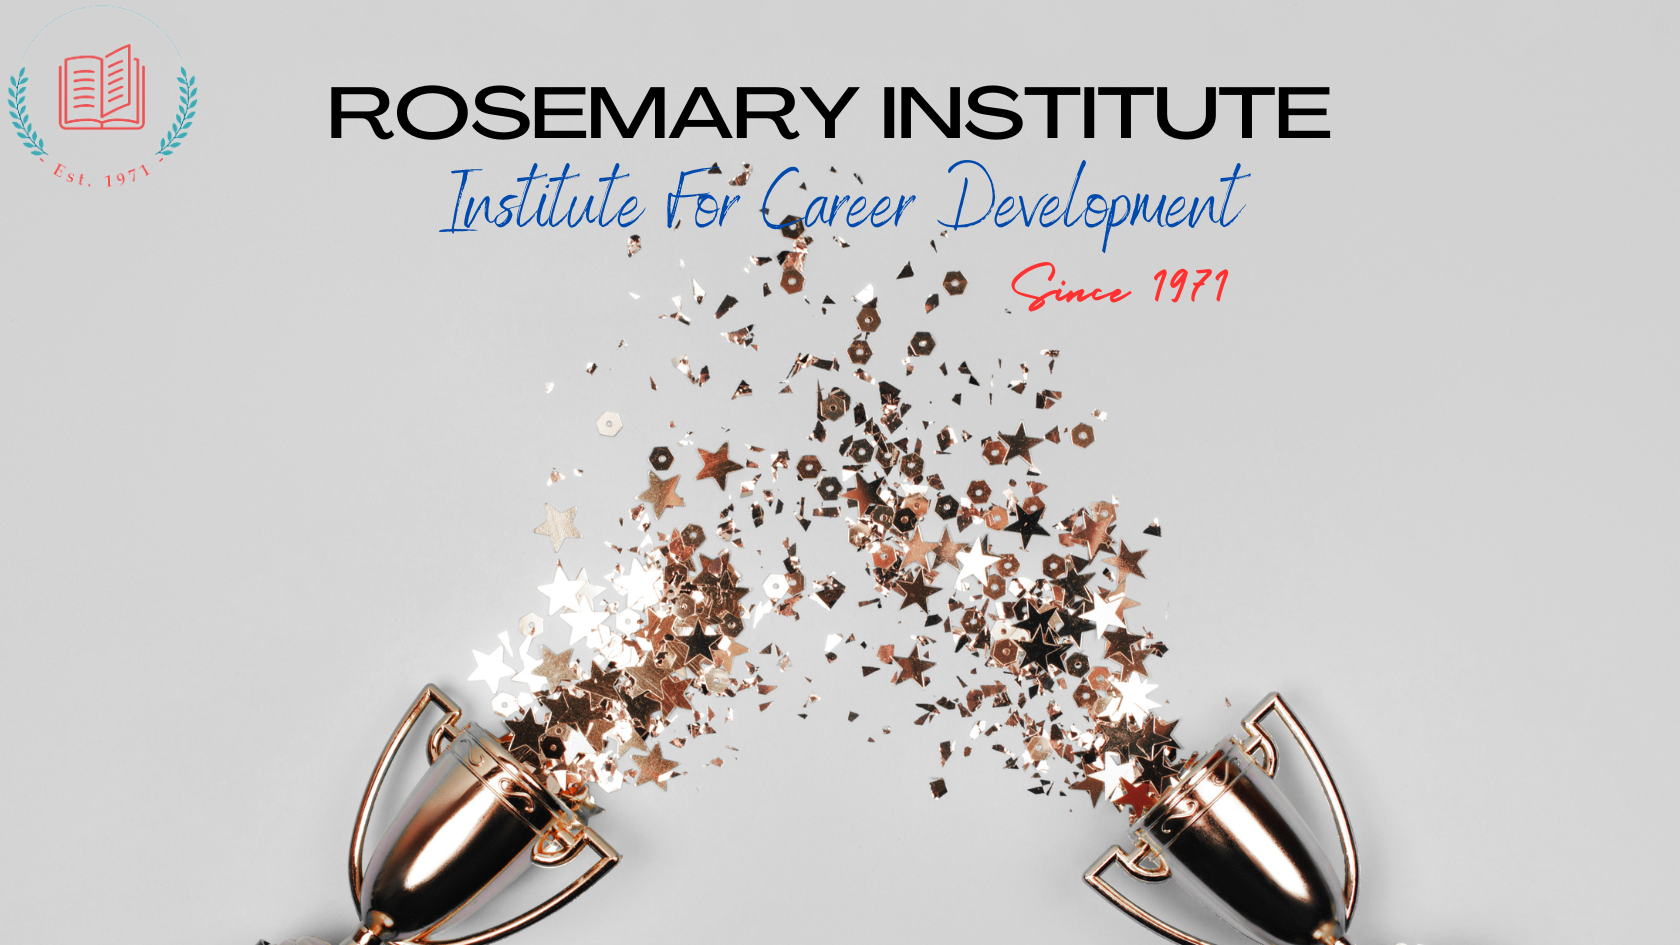 Rosemary Institute- 52 Years Of Excellence